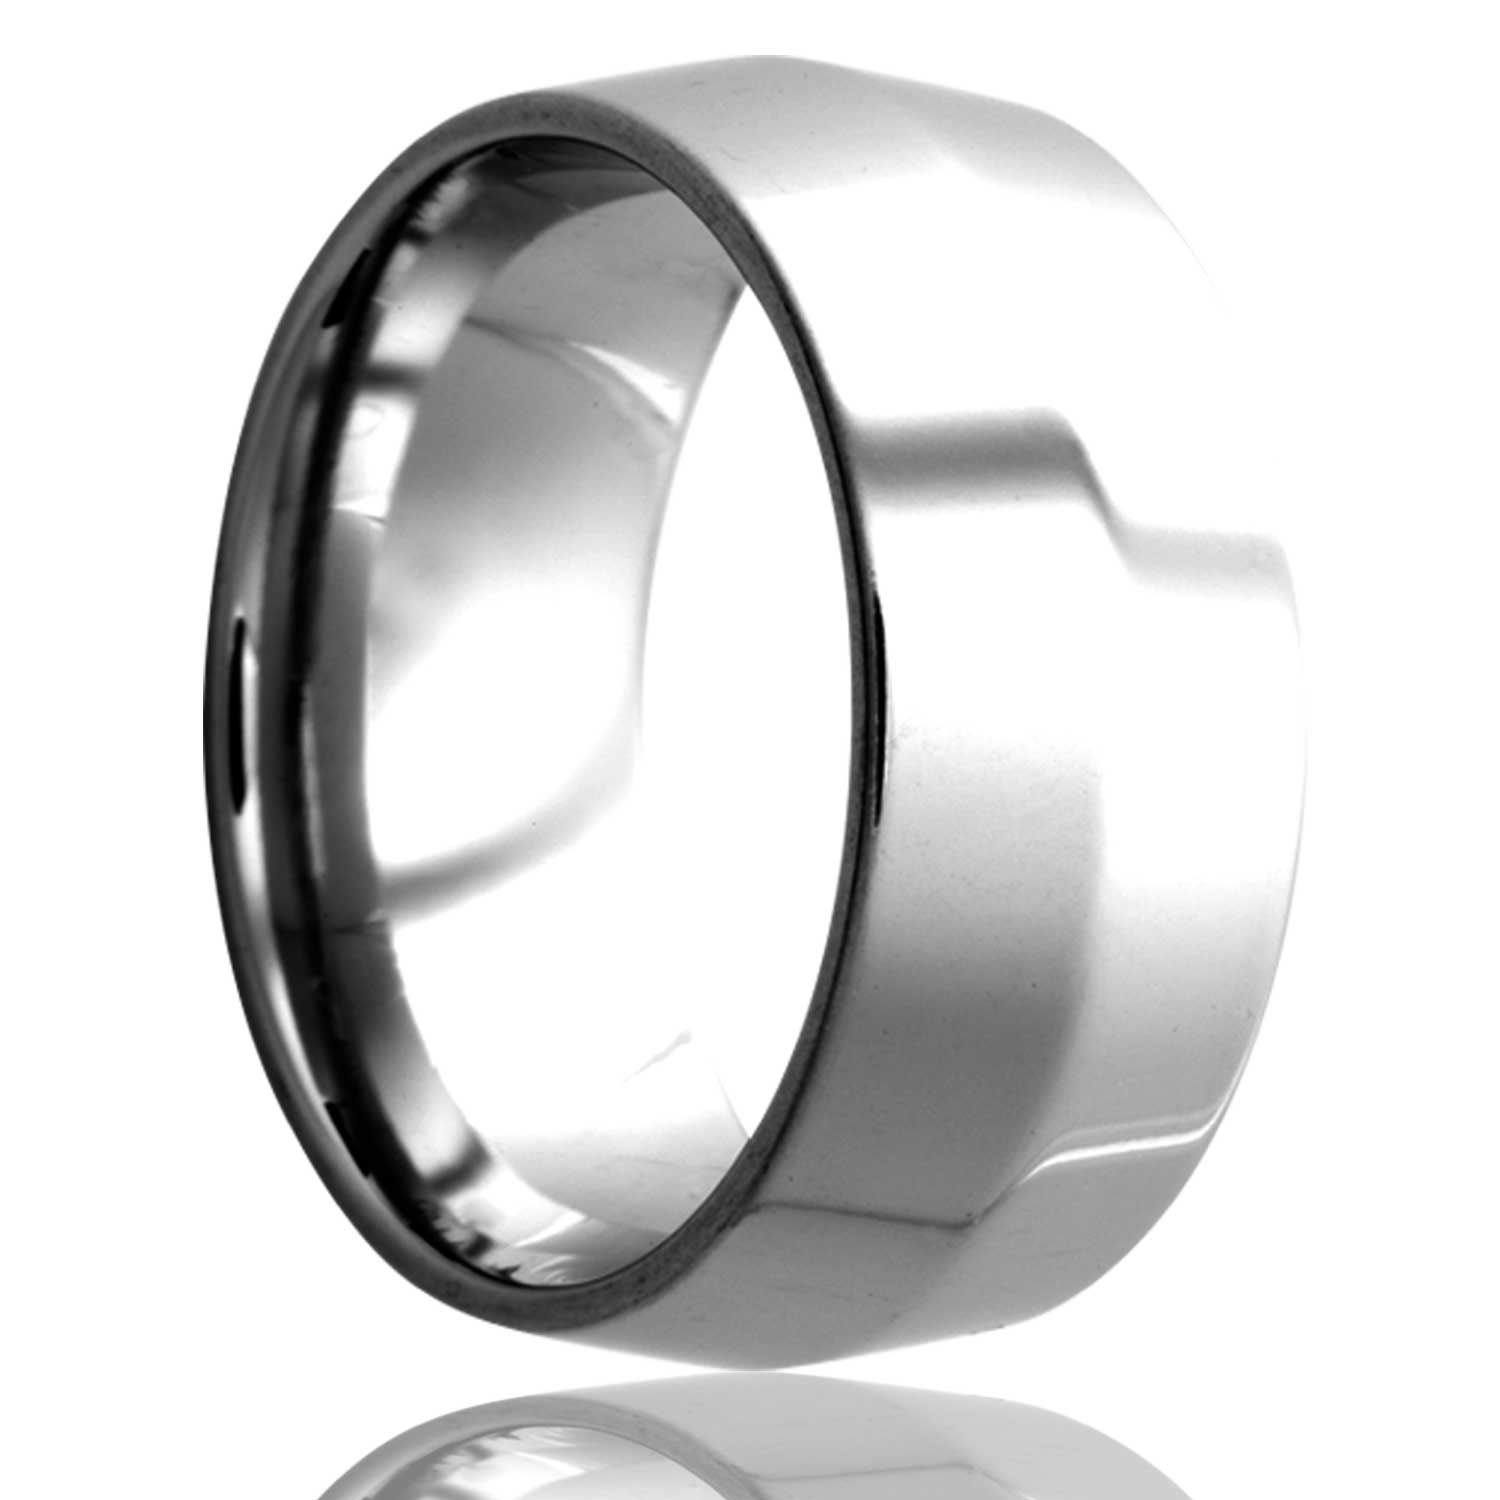 A knife edge platinum wedding band displayed on a neutral white background.